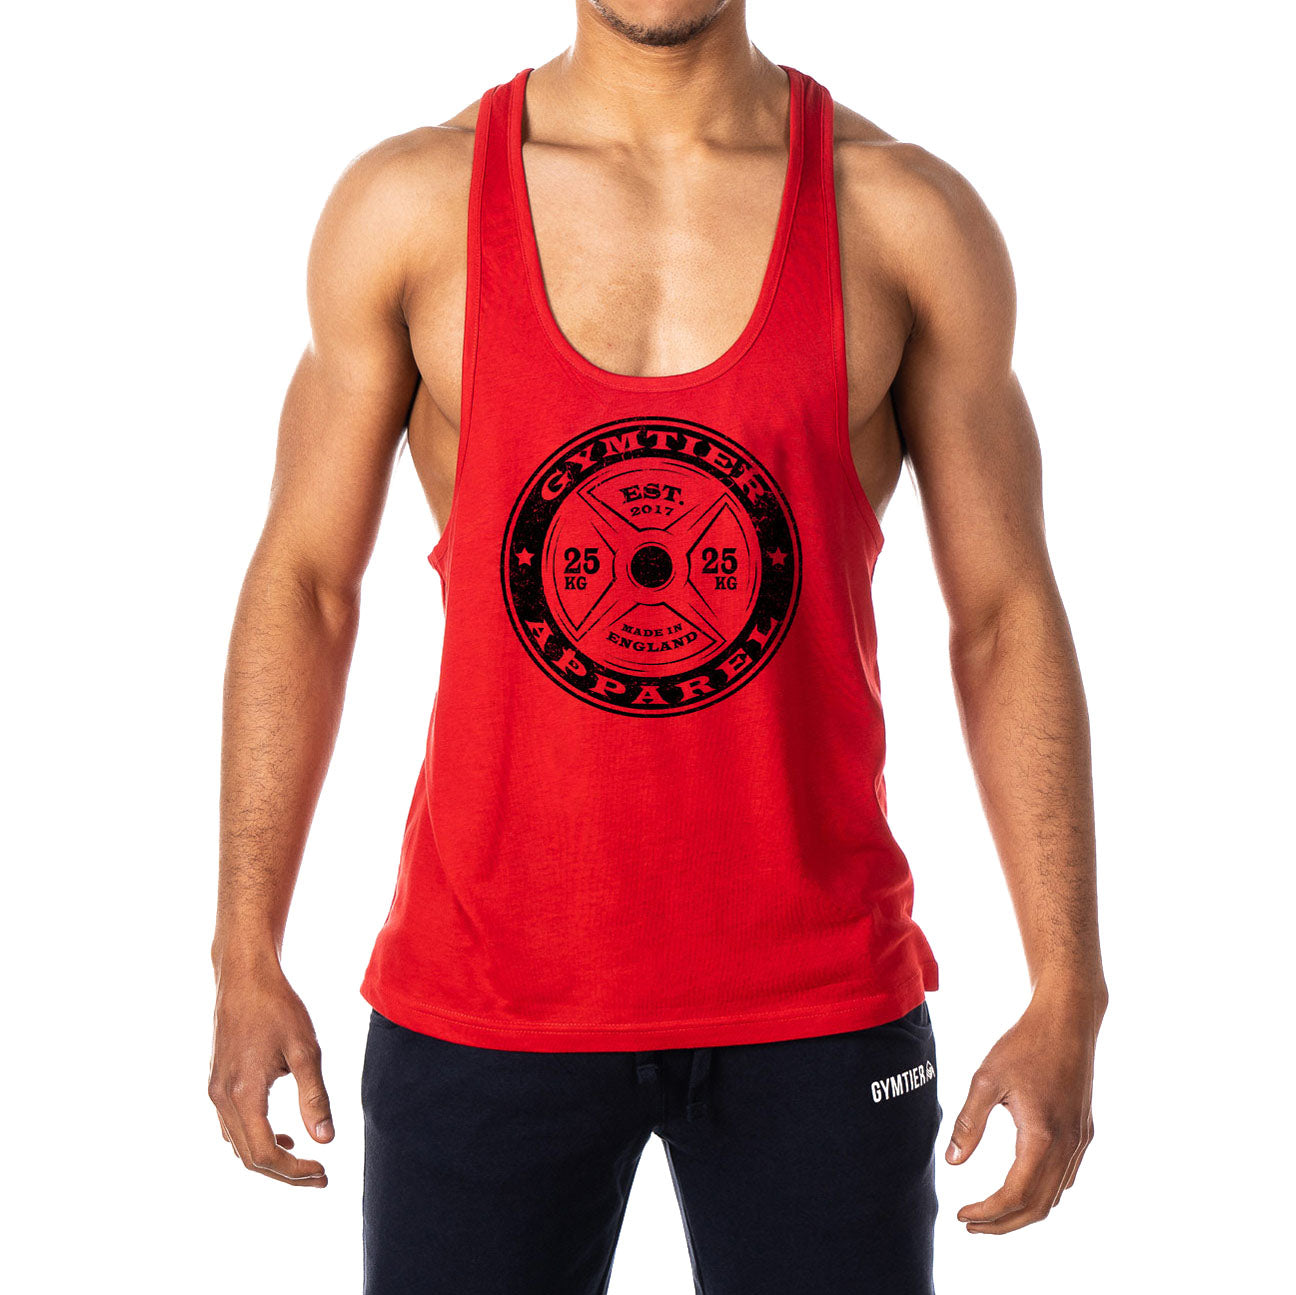 Ideology Mesh Racerback Tank Top Barbell S, Barbell, Small